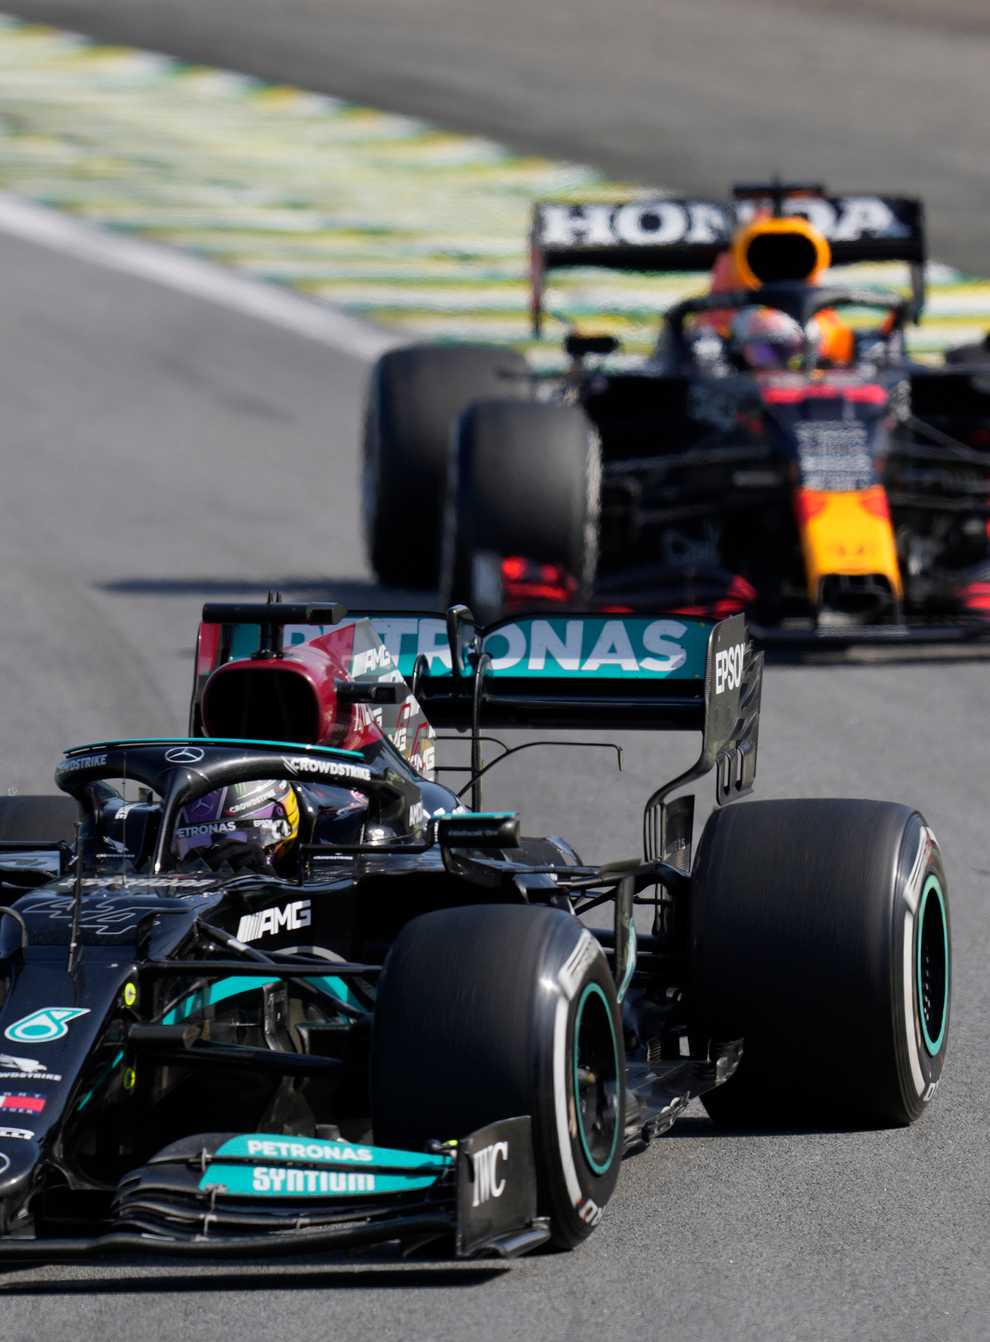 Lewis Hamilton, front, was able to pass Max Verstappen later in the race after they clashed at Interlagos (Andre Penner/AP)